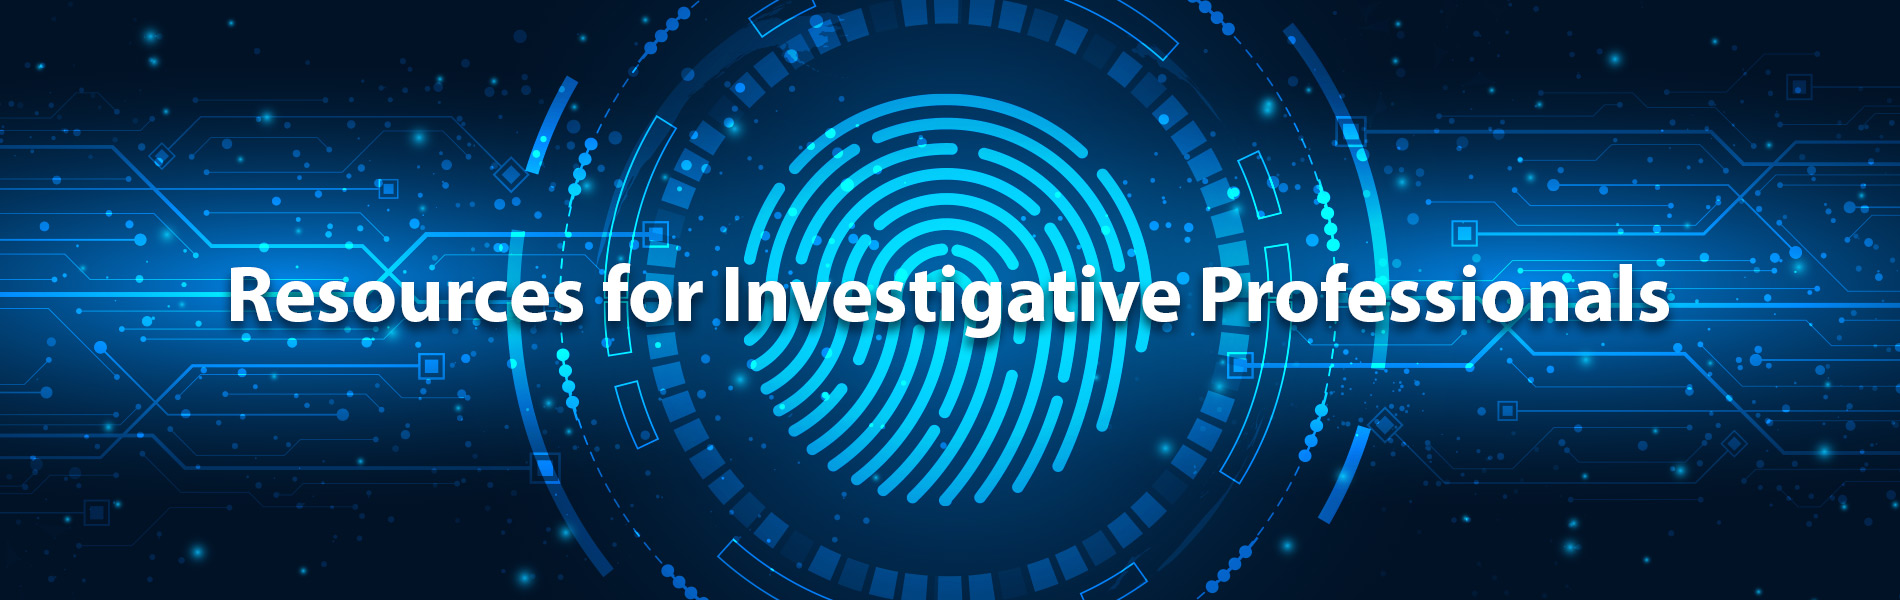 IRBsearch Resources for Investigative Professionals